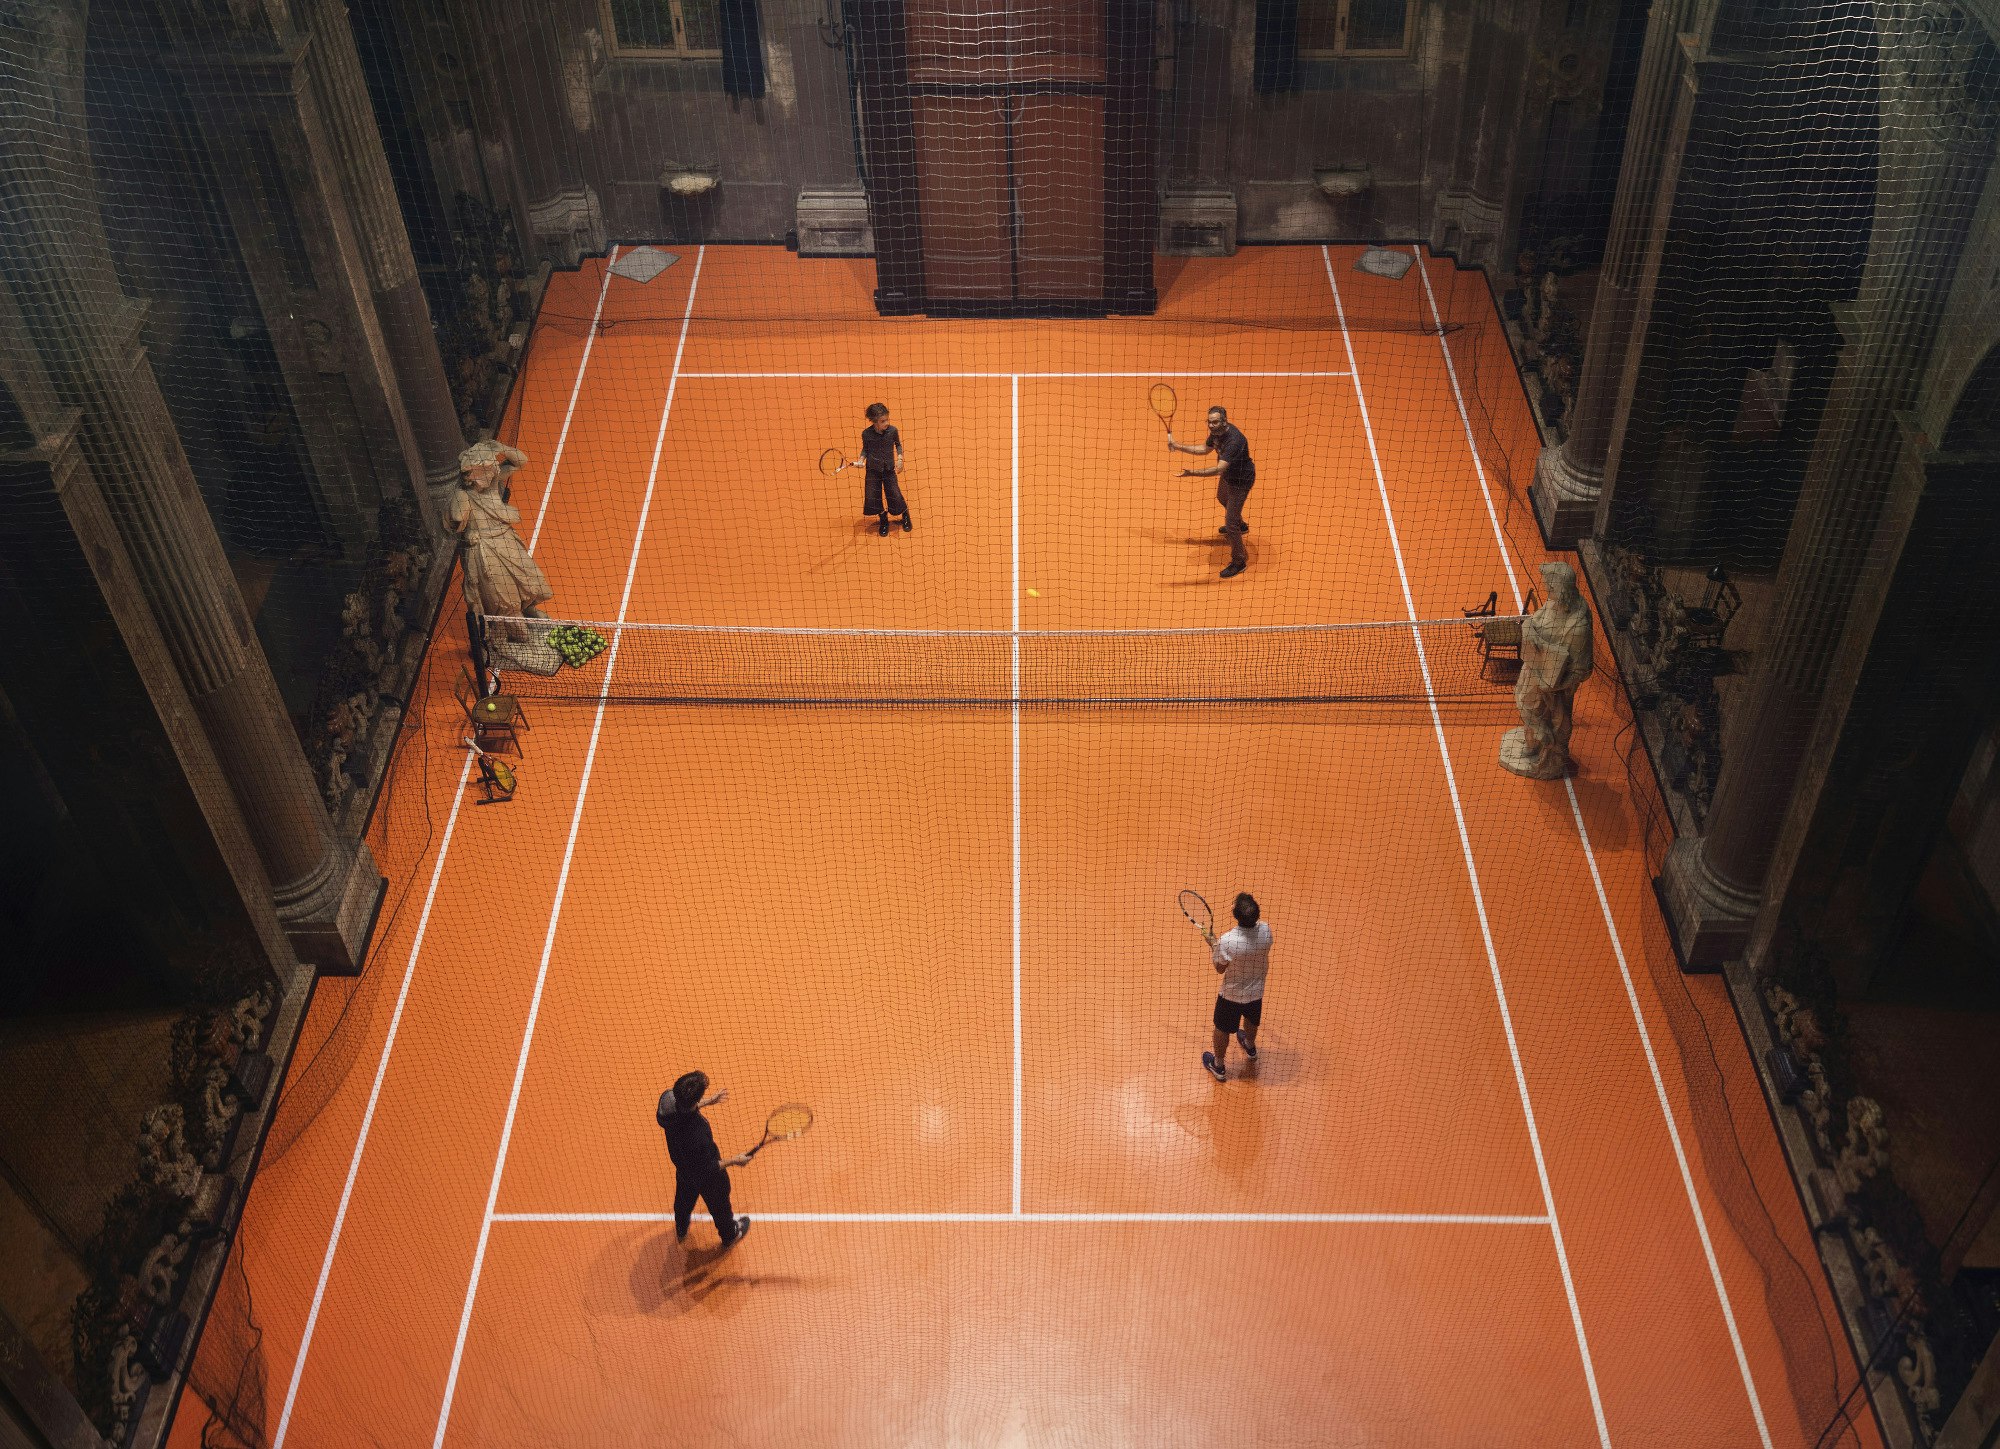 The tennis club is being hosted in the former church of San Paolo in Milan.